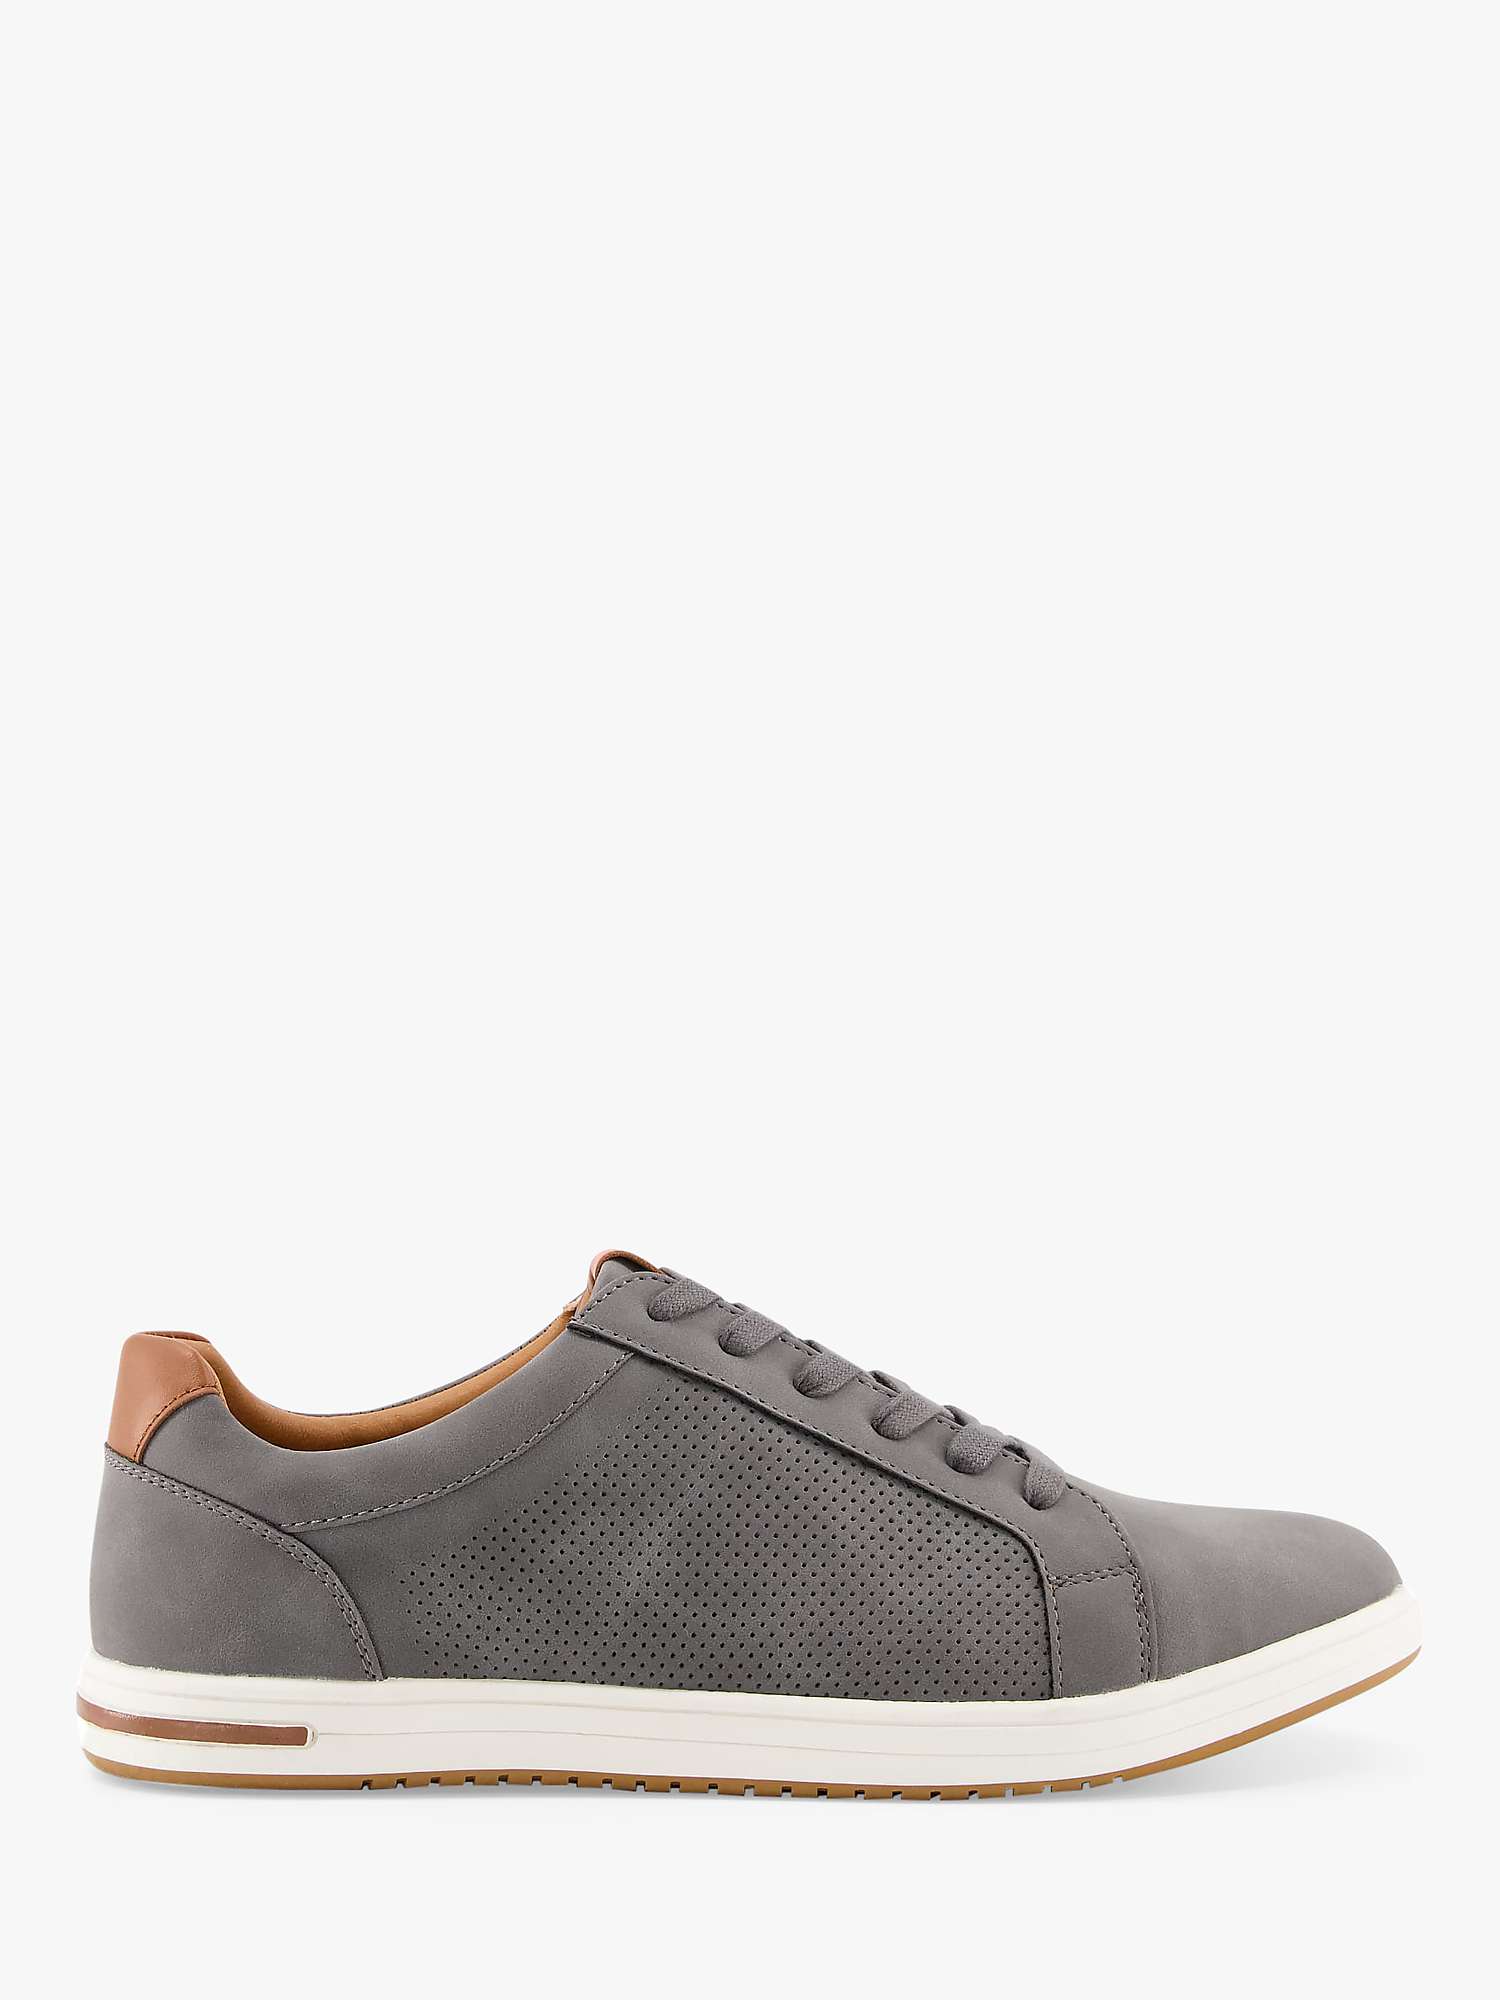 Buy Dune Tezzy Suedette Lace Up Trainers Online at johnlewis.com